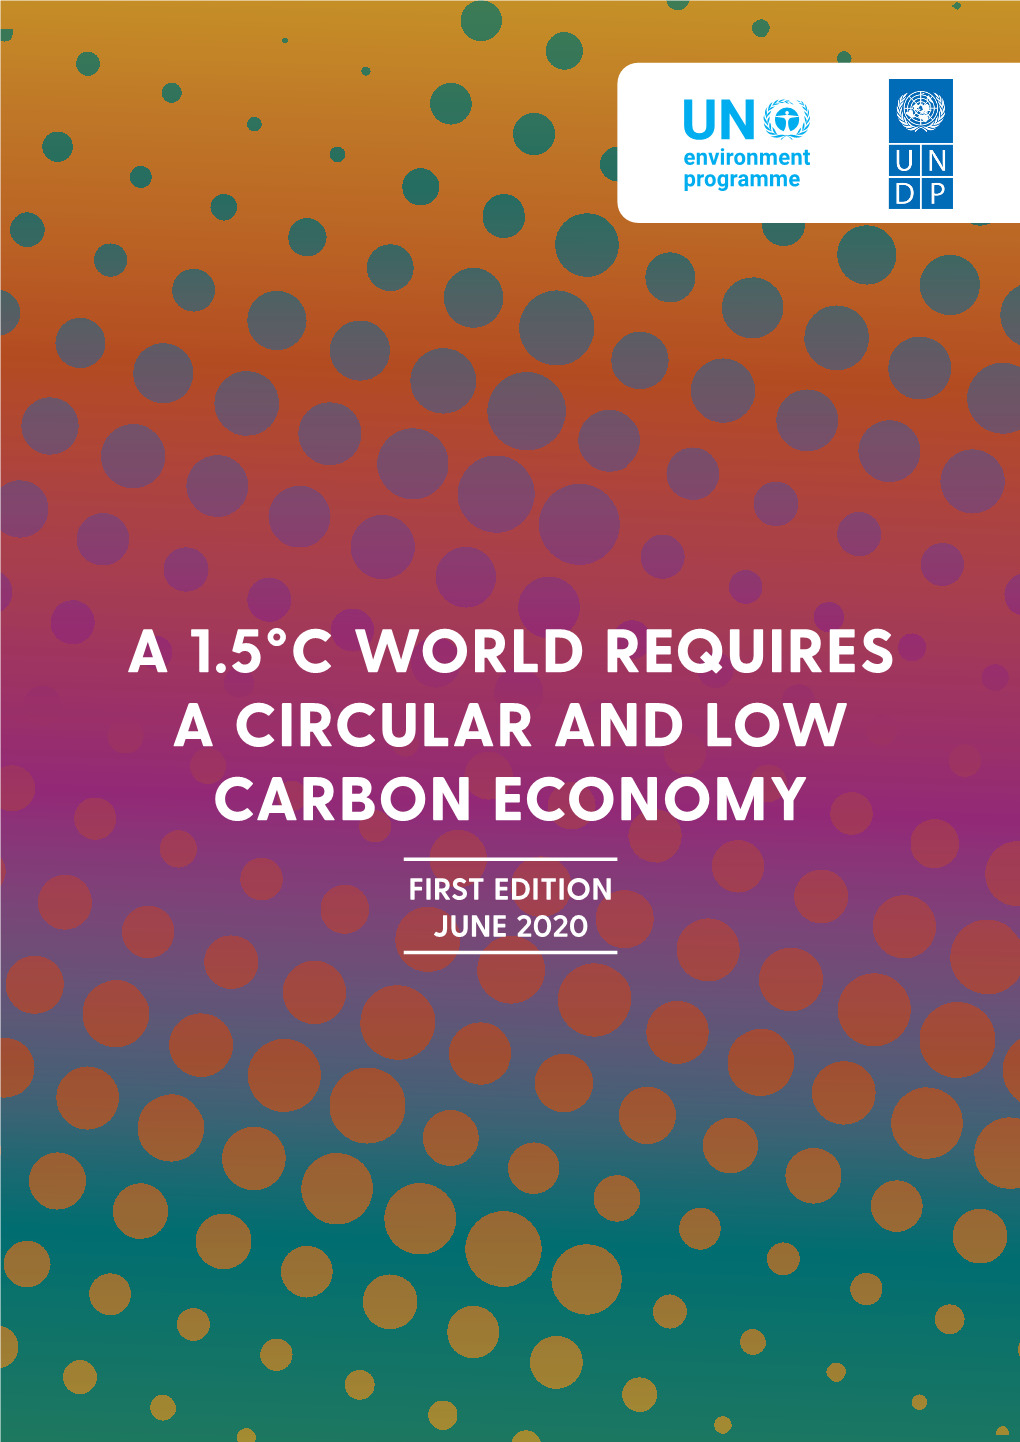 A 1.5°C World Requires a Circular and Low Carbon Economy